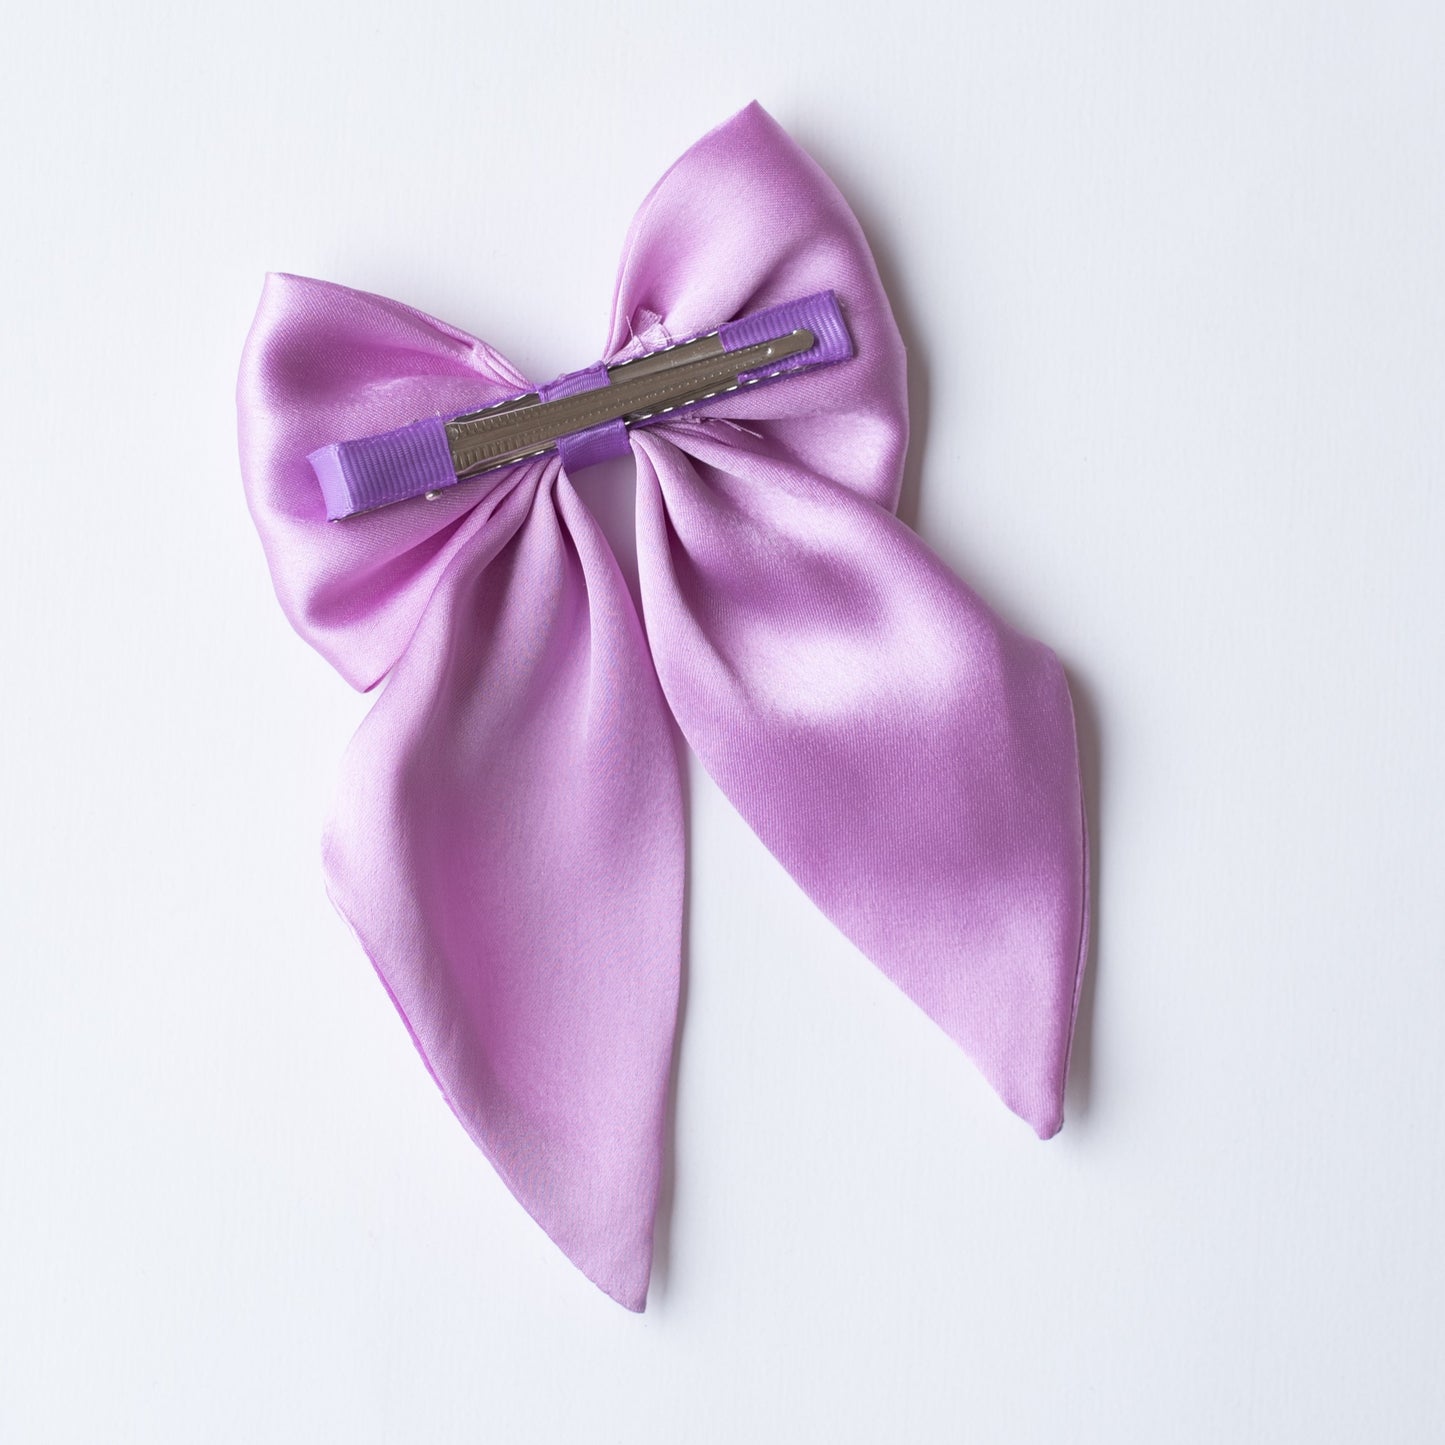 Big fancy satin bow on alligator clip embellished with pearls - Light Purple